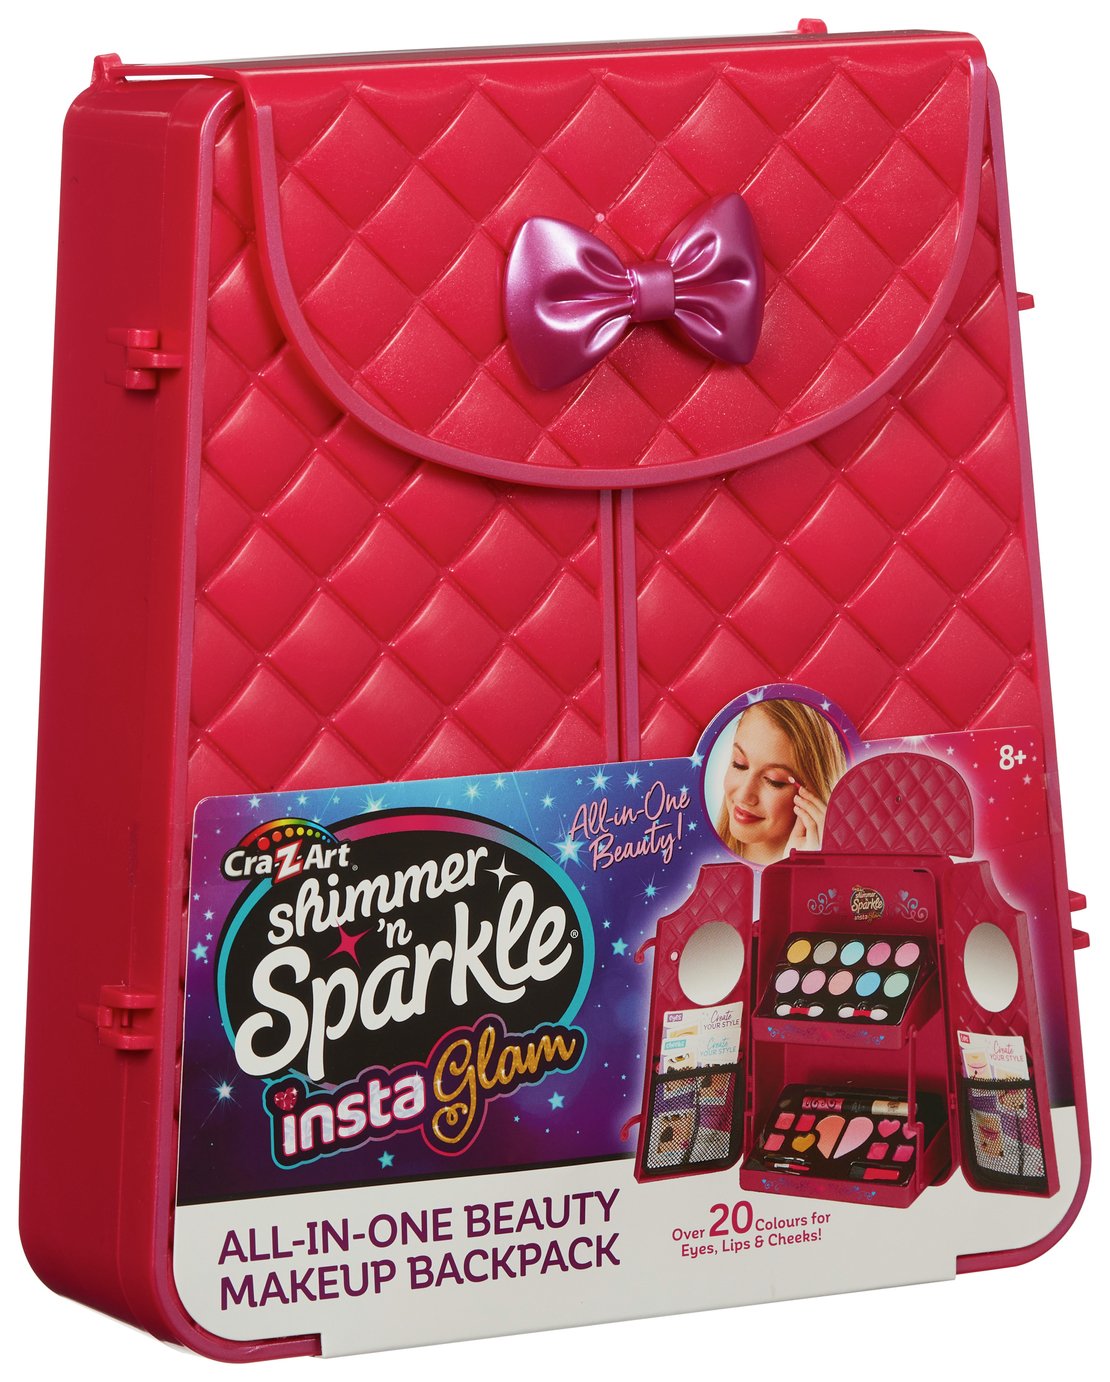 Shimmer and Sparkle InstaGlam Beauty Backpack Review